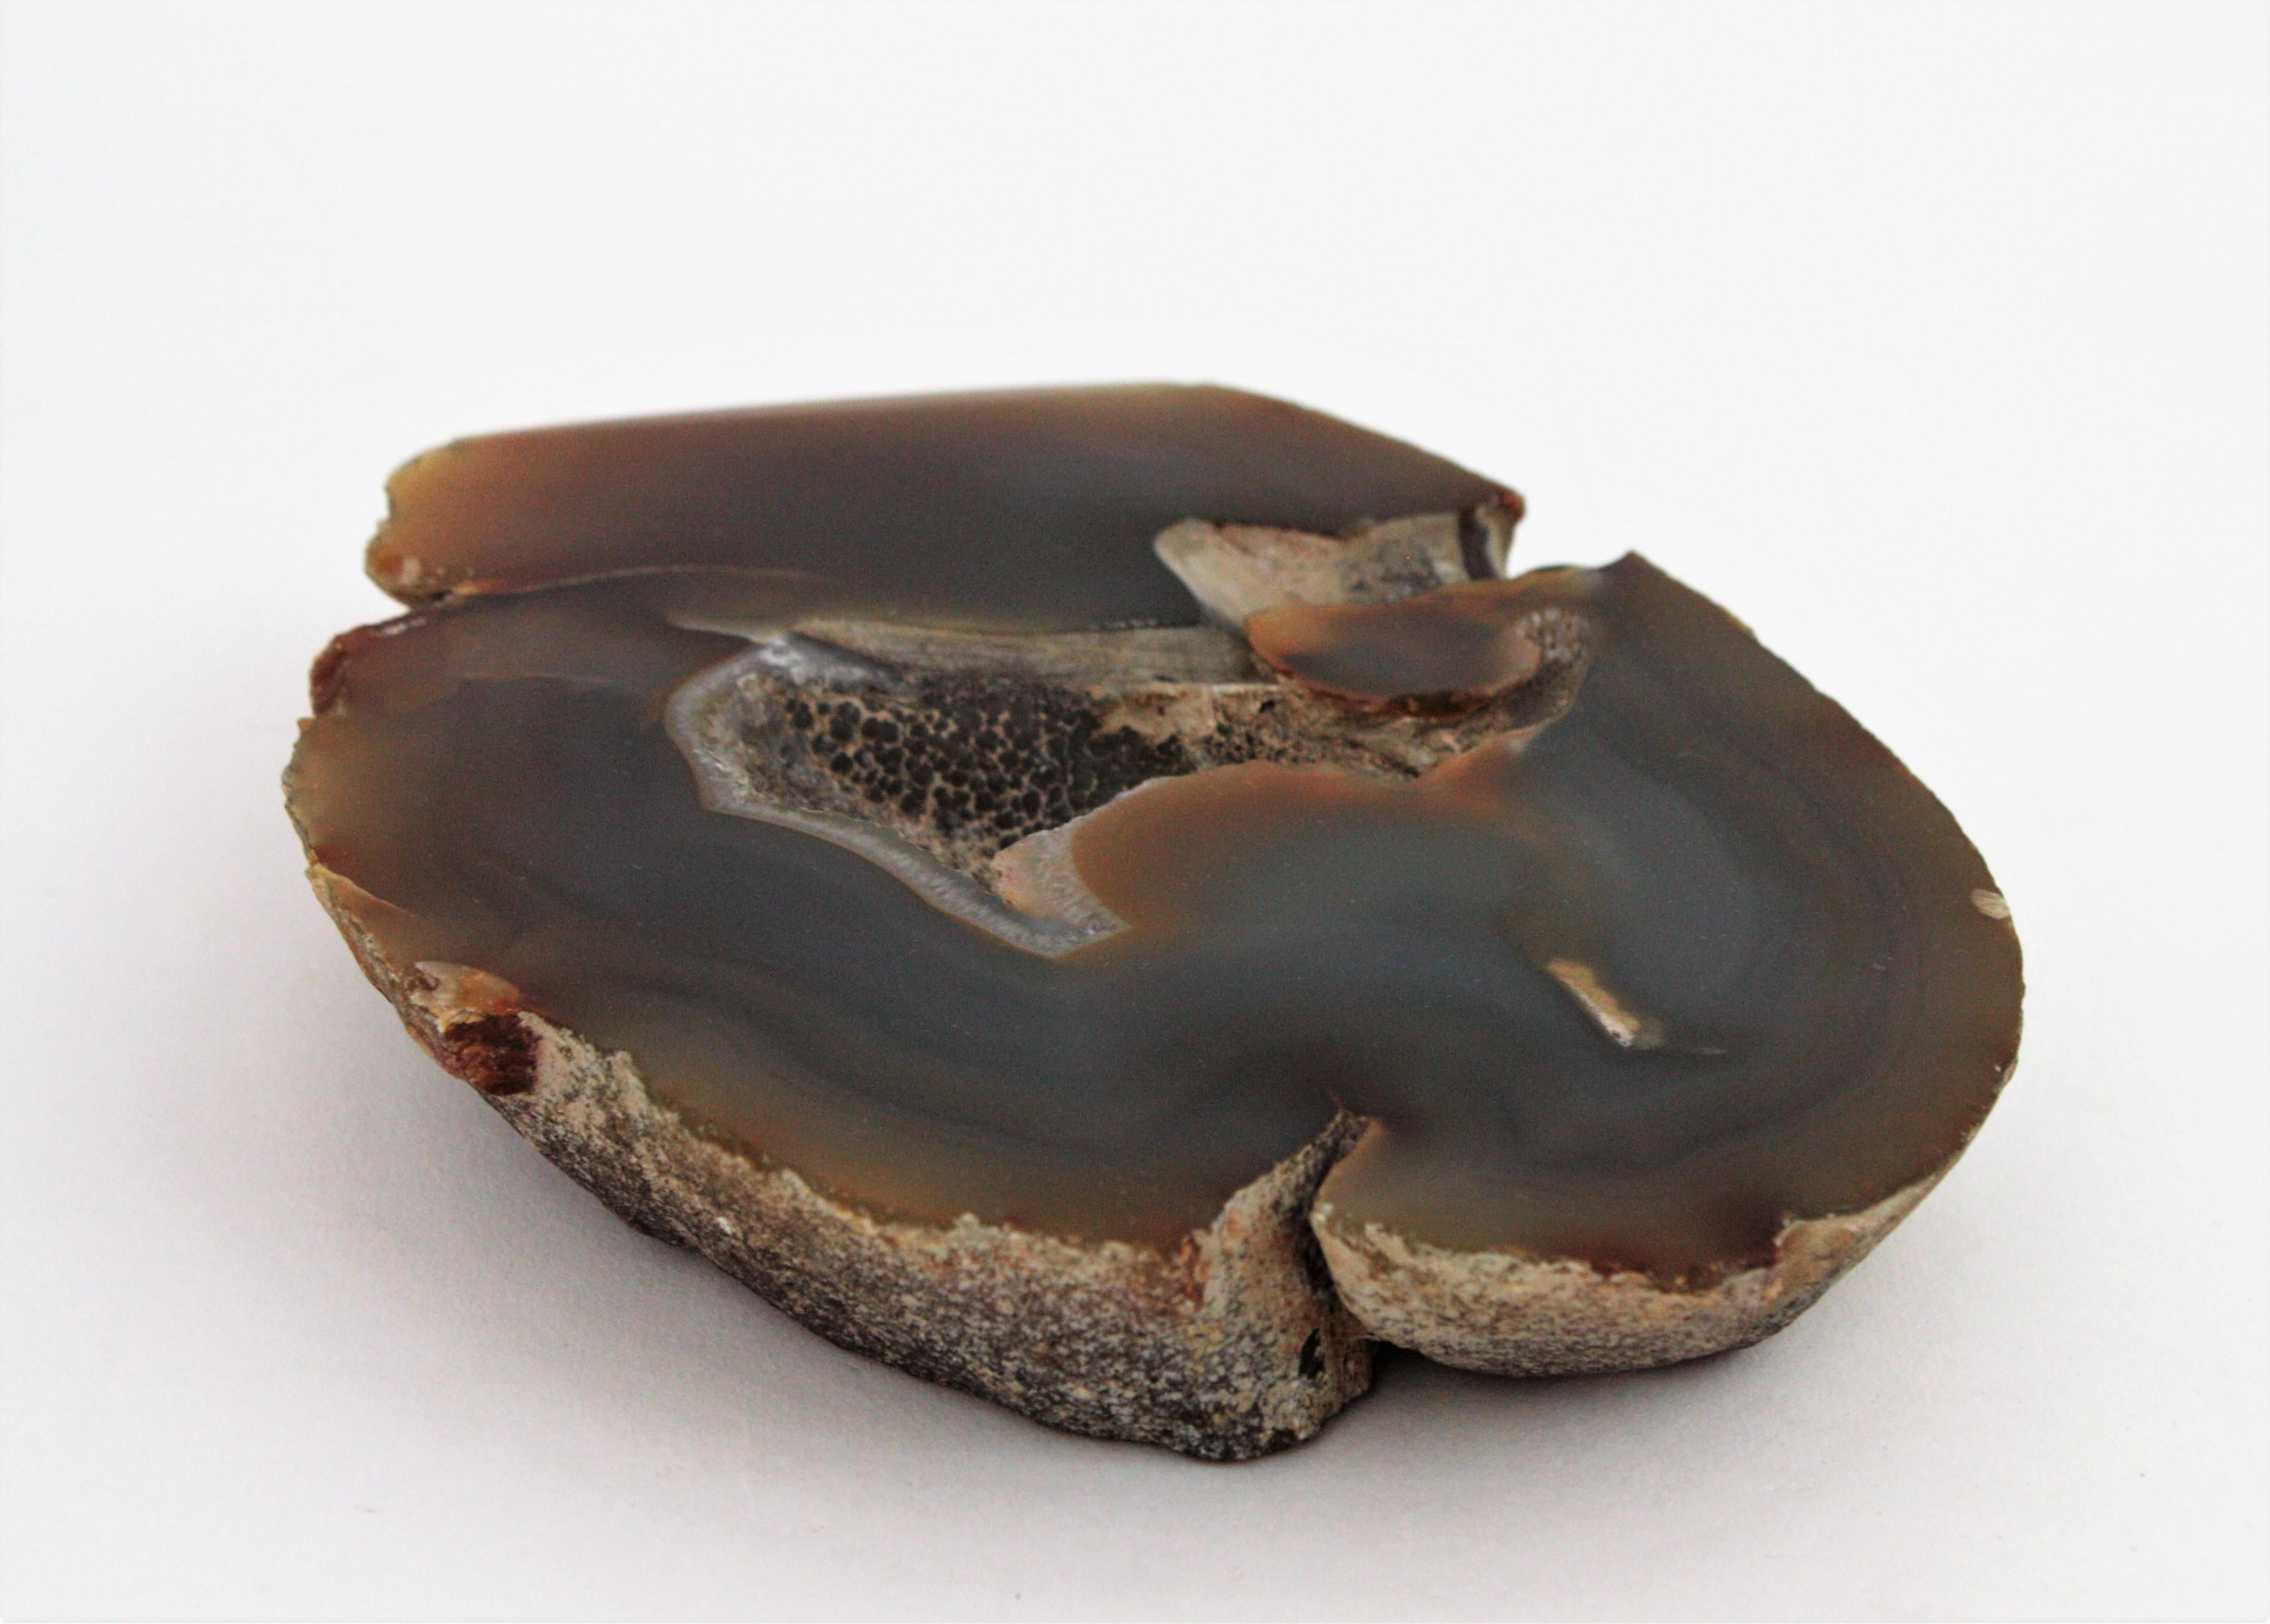 Lovely natural onyx stone ashtray, paperweight or rings bowl, Spain, 1950s-1960s.
Cut and polished stone showing the mineral’s distinctive banding striations in different shades of brown and grey
The sides remain unpolished.
Beautiful to be used